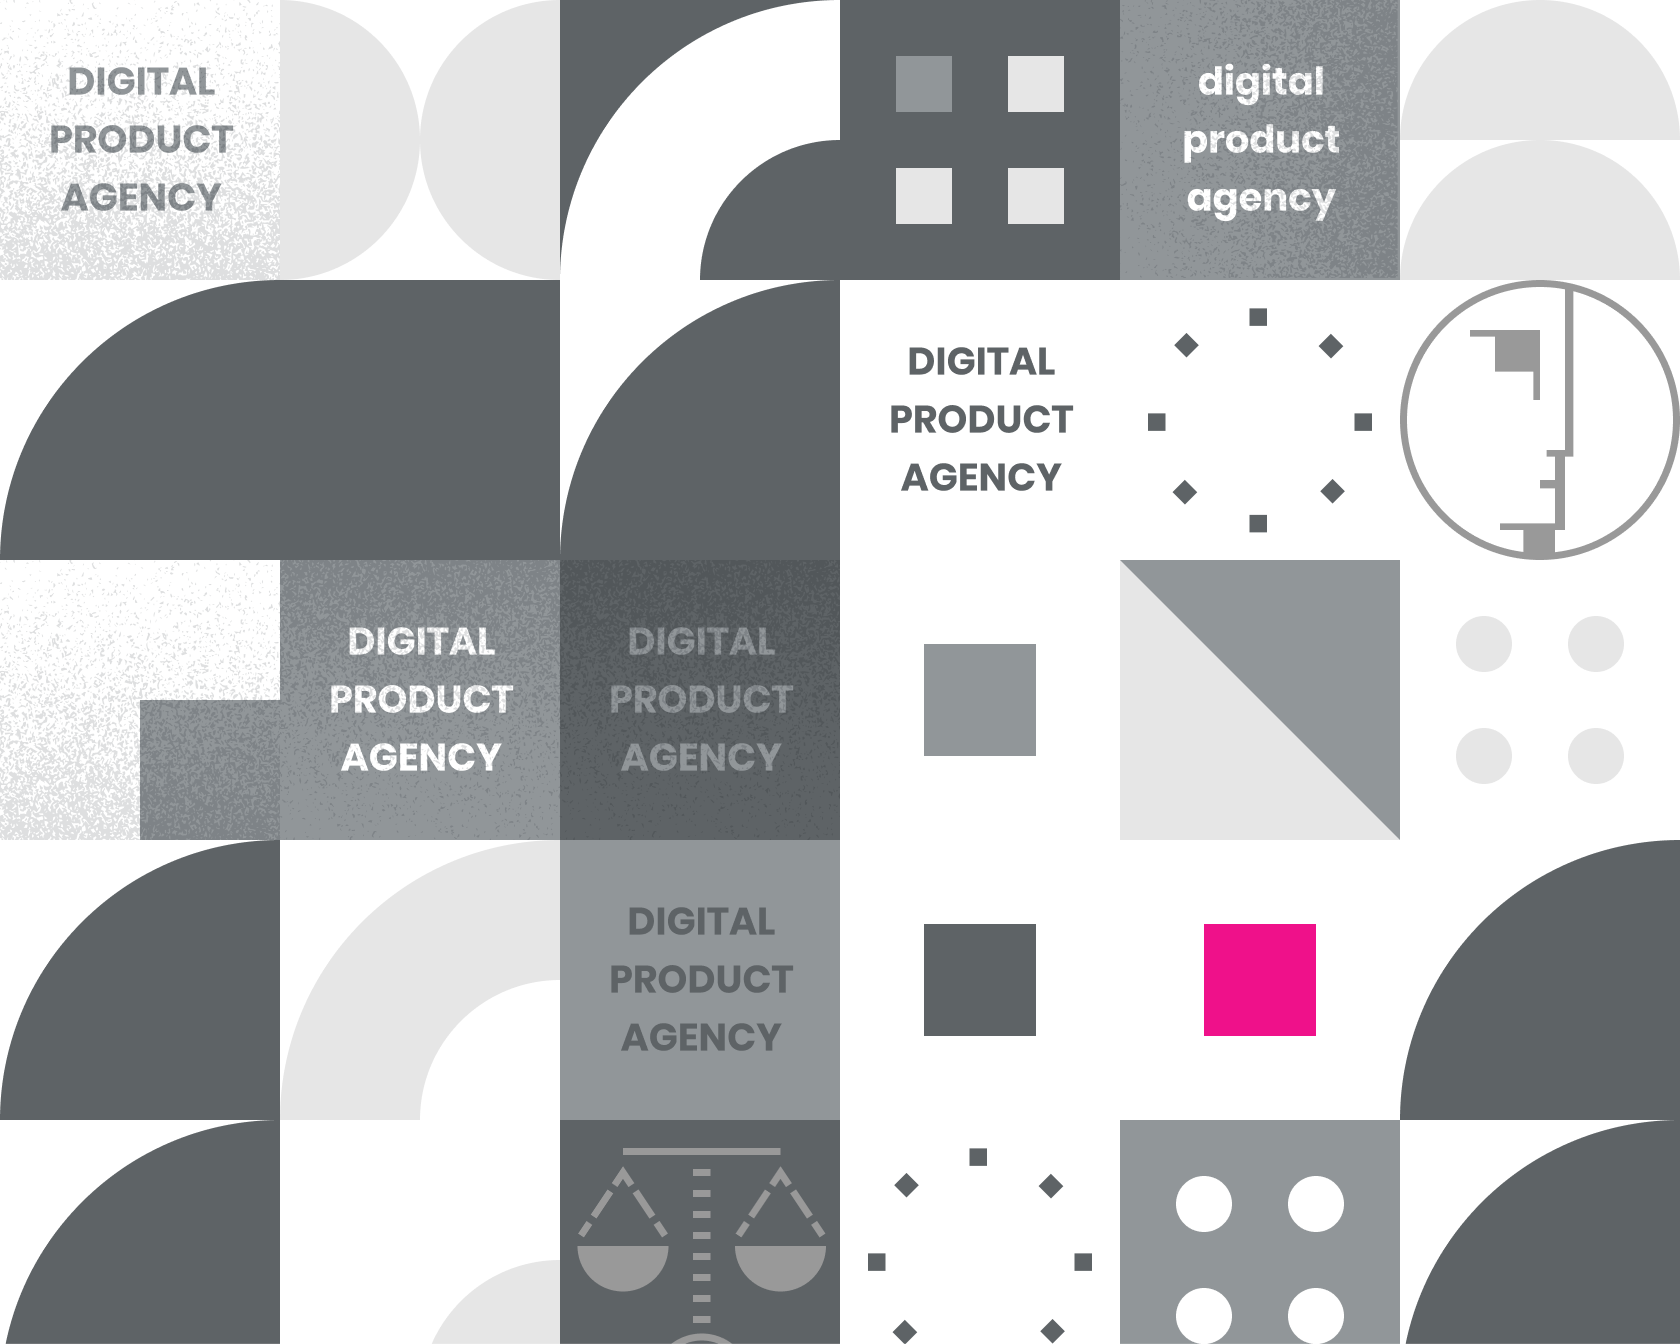 A digital product design agency's portfolio, featuring a variety of innovative designs for well-known tech companies.